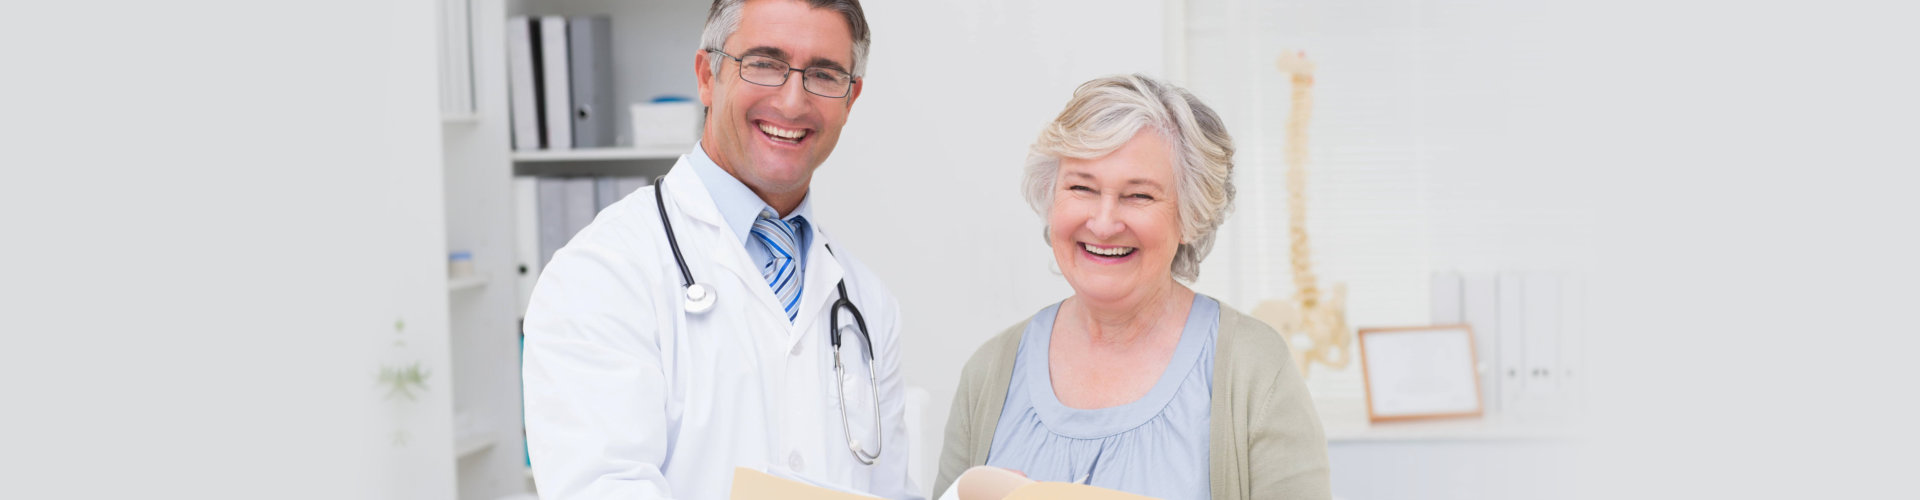 doctor smiling with elderly woman